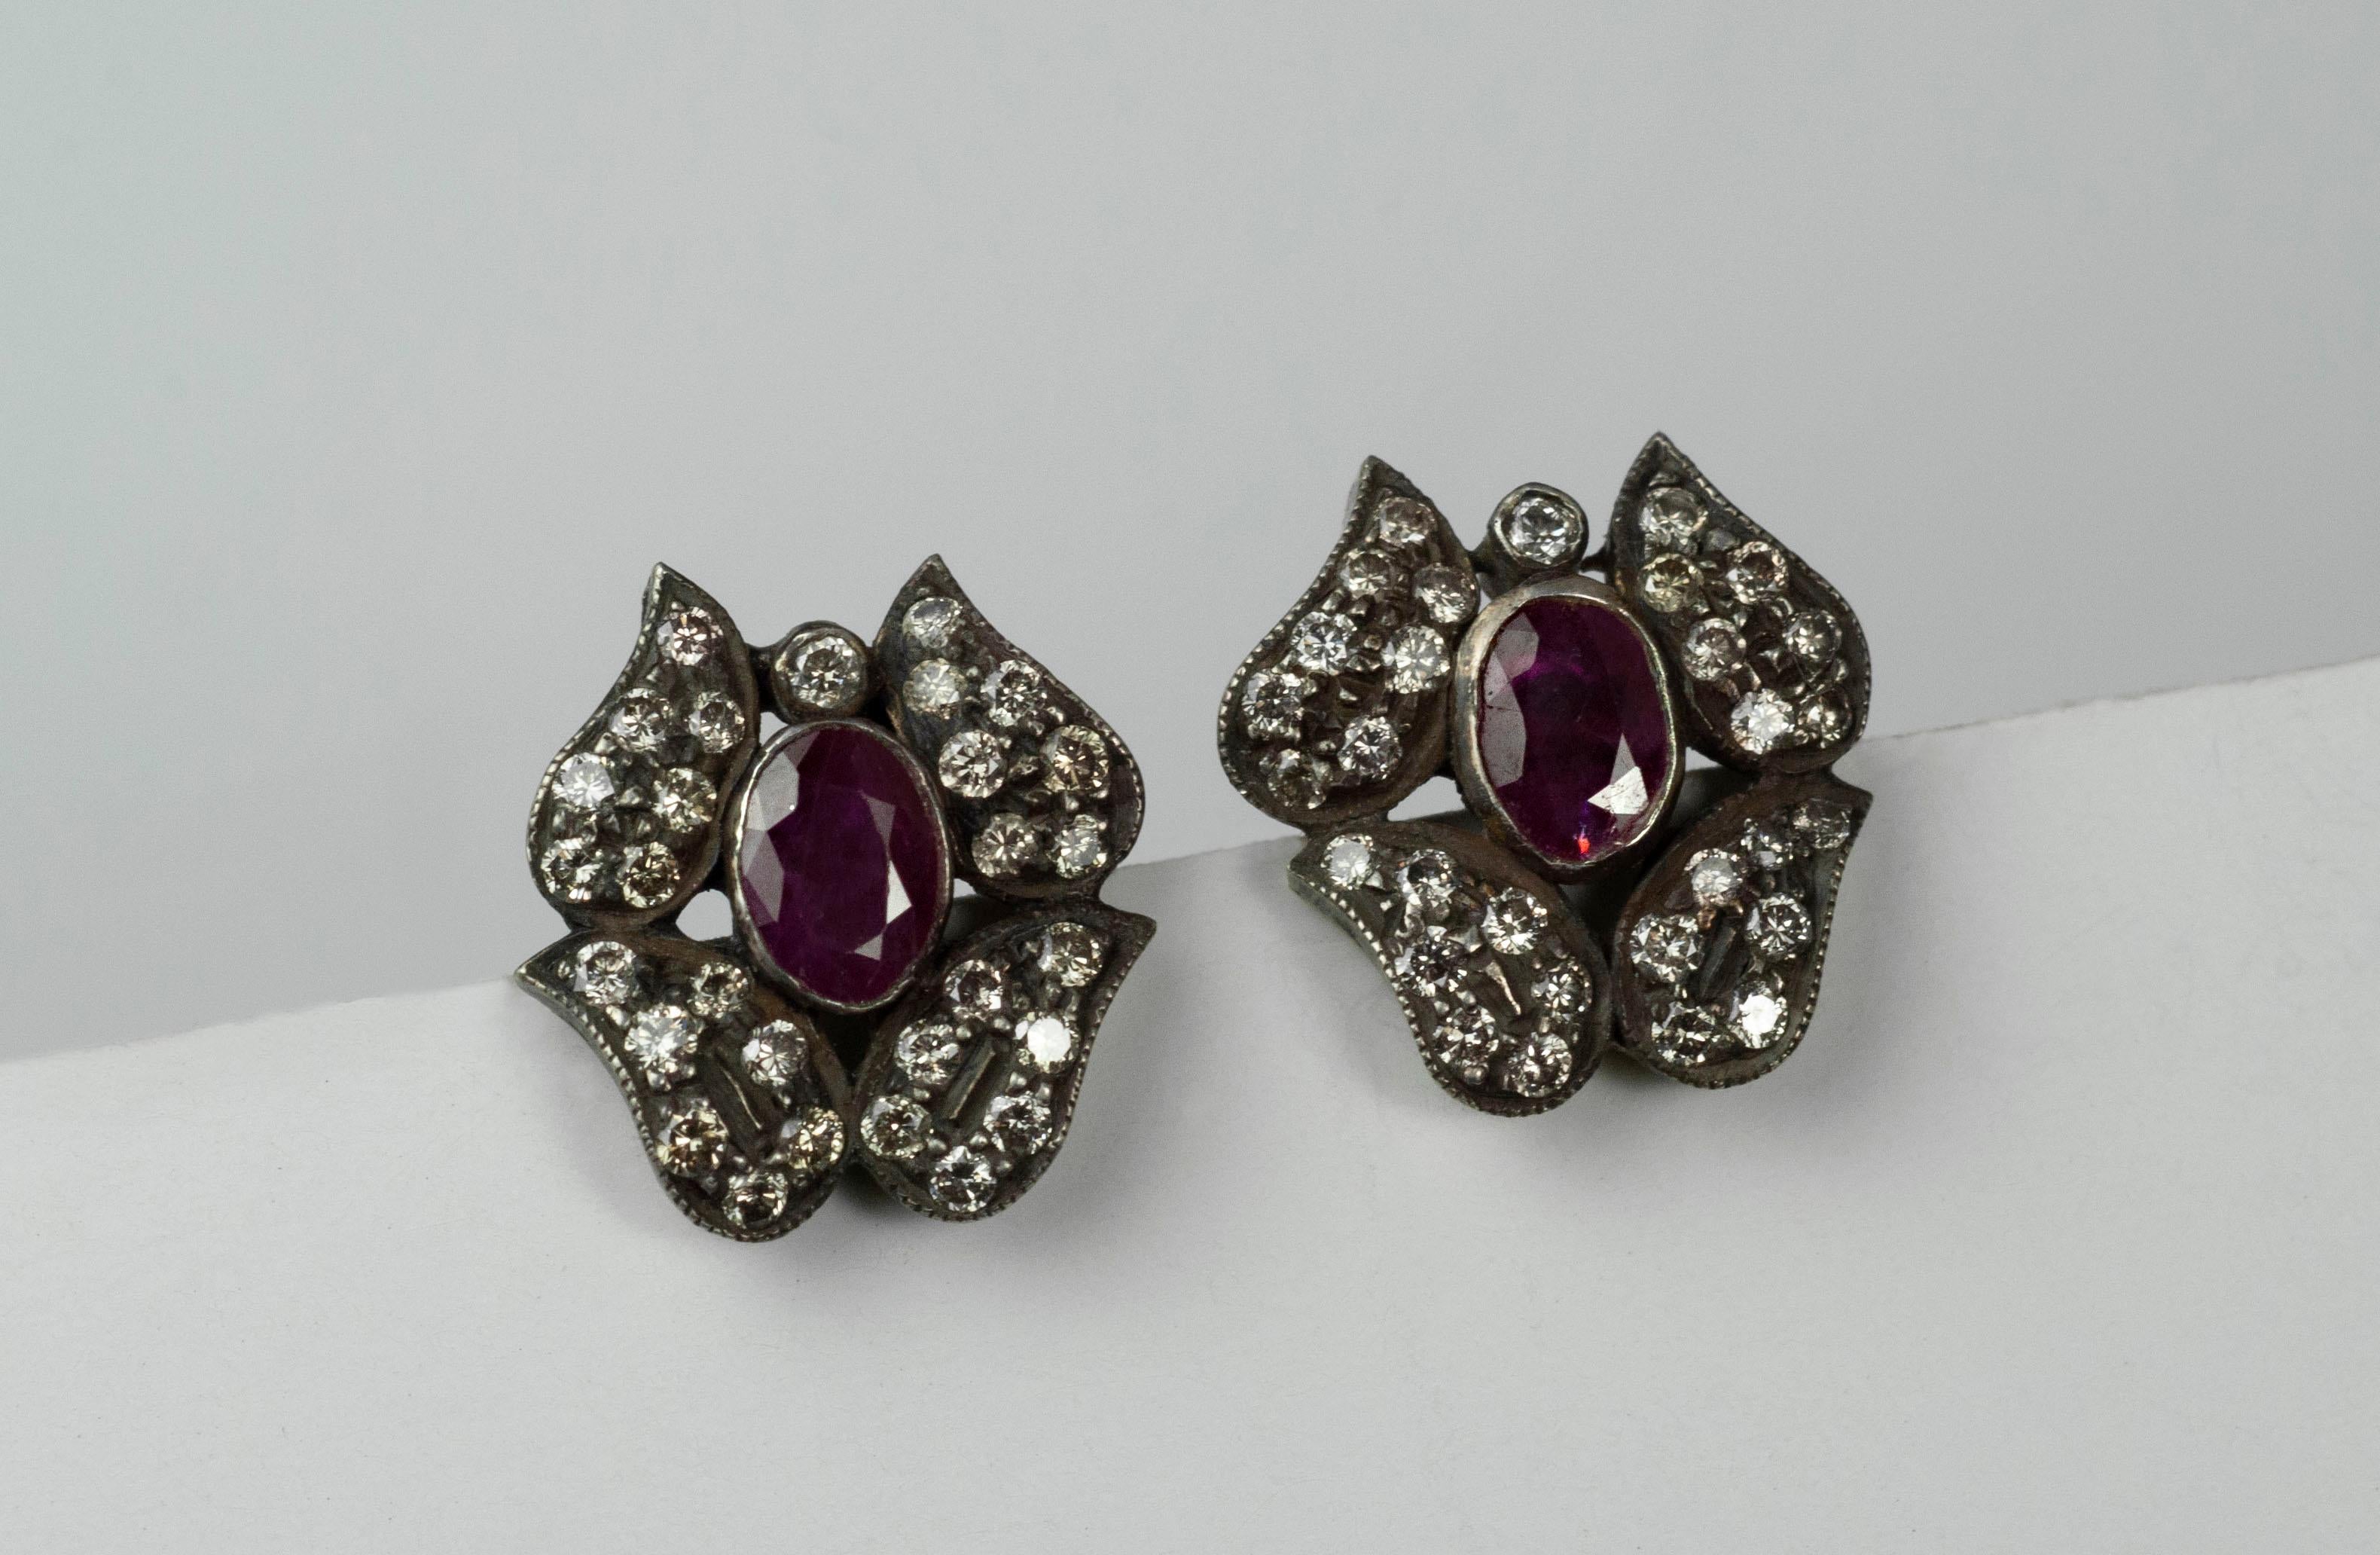 Unique stud earrings in oxidized sterling silver featuring a faceted oval ruby center and pave diamonds, with 14K gold posts.